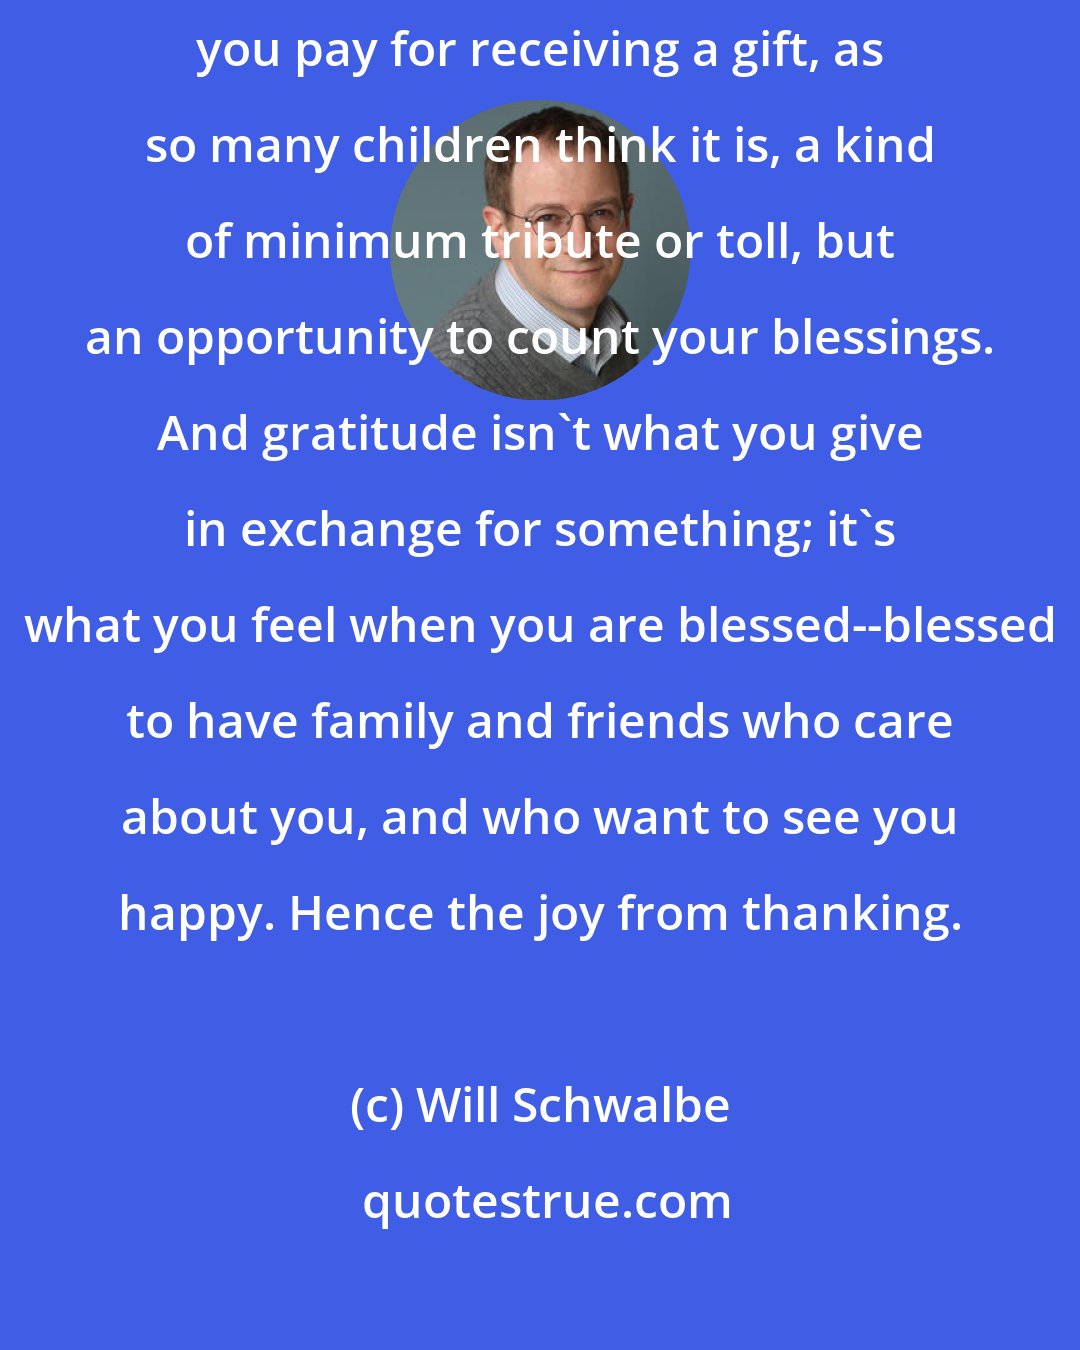 Will Schwalbe: What I suddenly understood was that a thank-you note isn't the price you pay for receiving a gift, as so many children think it is, a kind of minimum tribute or toll, but an opportunity to count your blessings. And gratitude isn't what you give in exchange for something; it's what you feel when you are blessed--blessed to have family and friends who care about you, and who want to see you happy. Hence the joy from thanking.